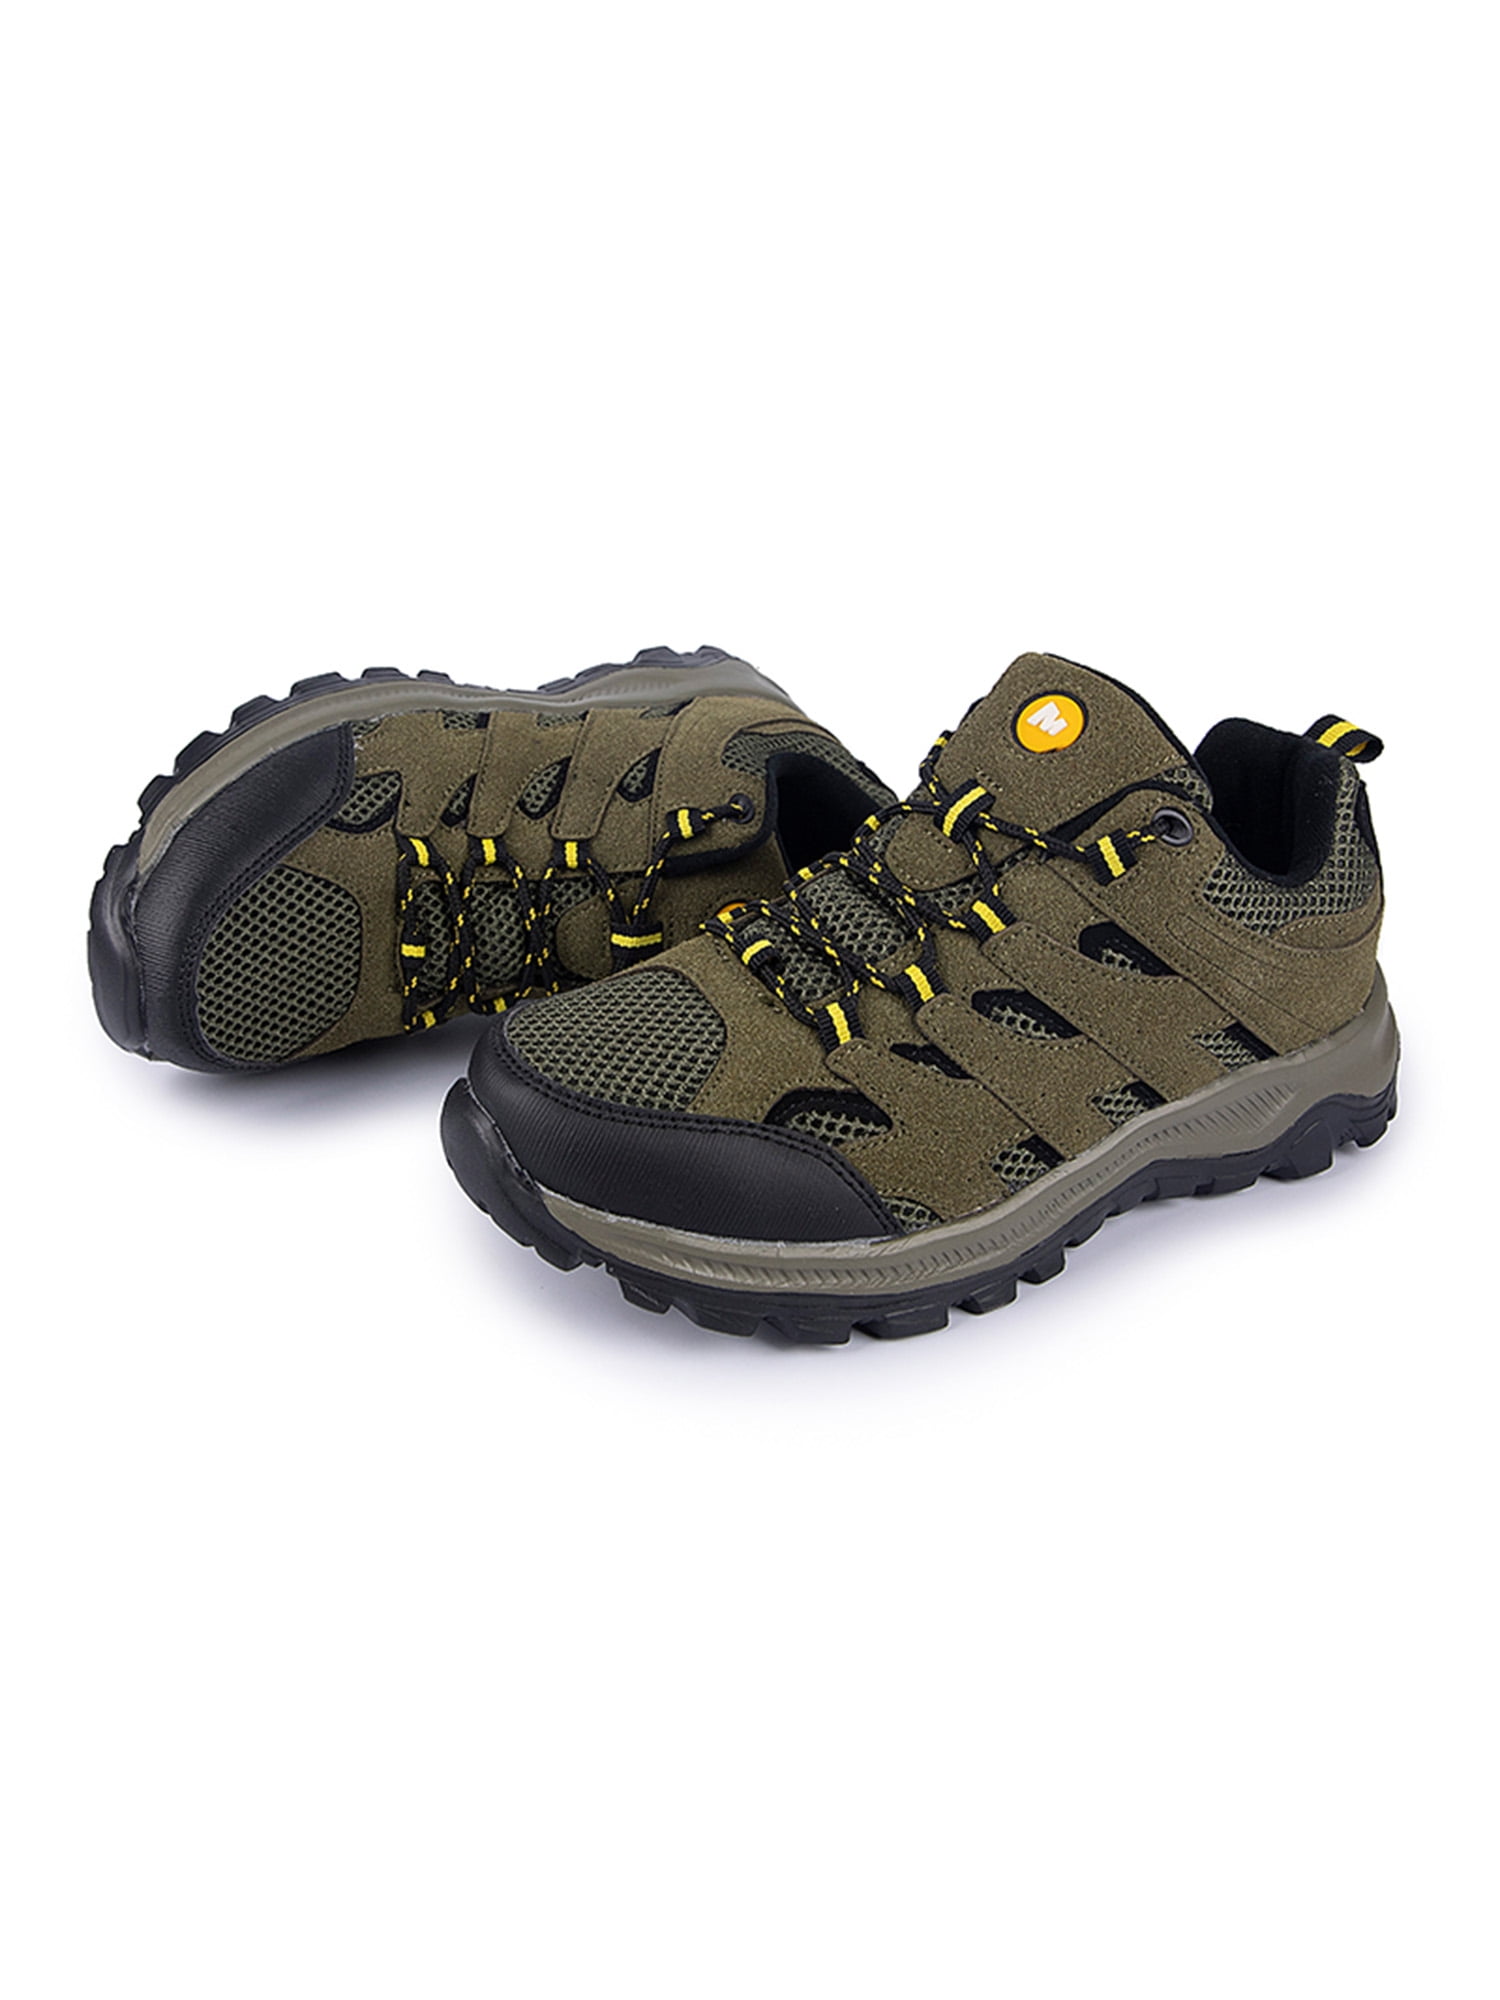 Details about   Mens Outdoor Running Work Safety Shoes Indestructible Steel Toe Sneaker Hiking 